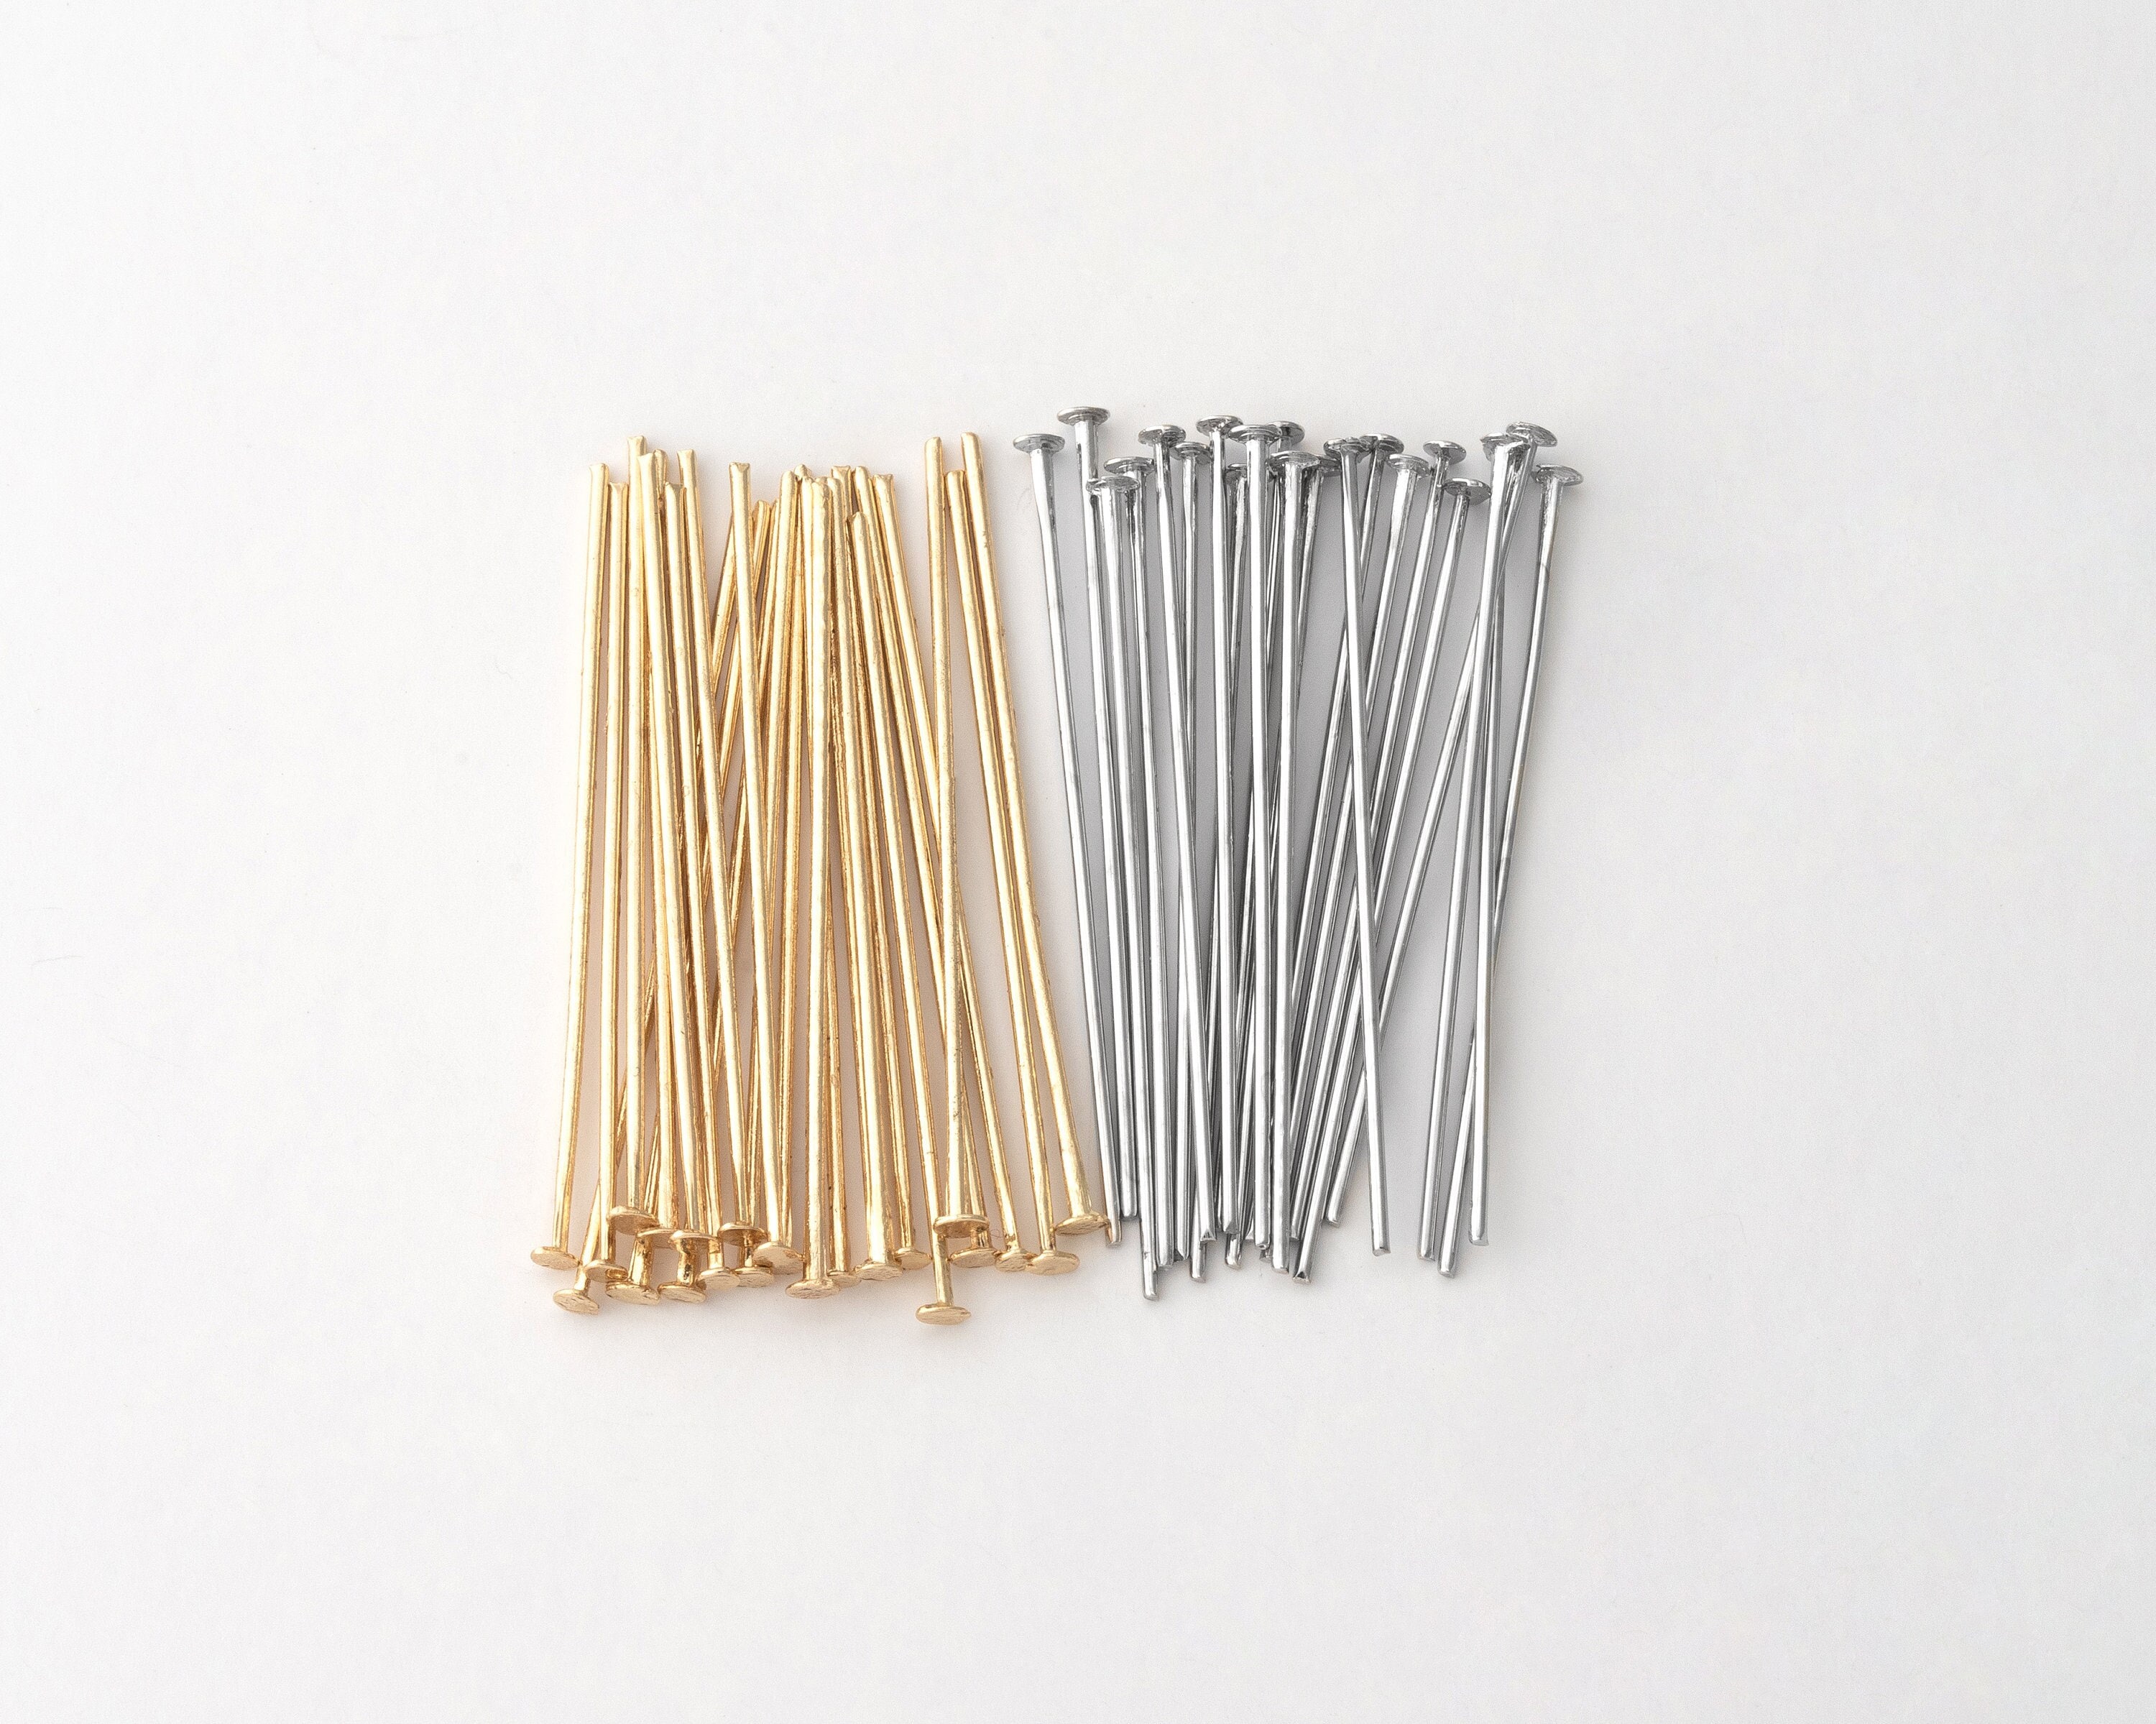 100PCS Head Pin Basic Supplie, T-pins, Head Pin 30mm by 0.6mm, Jewelry  Making, Charm Making, Real 14K Gold & Rhodium Plated headpin-630 